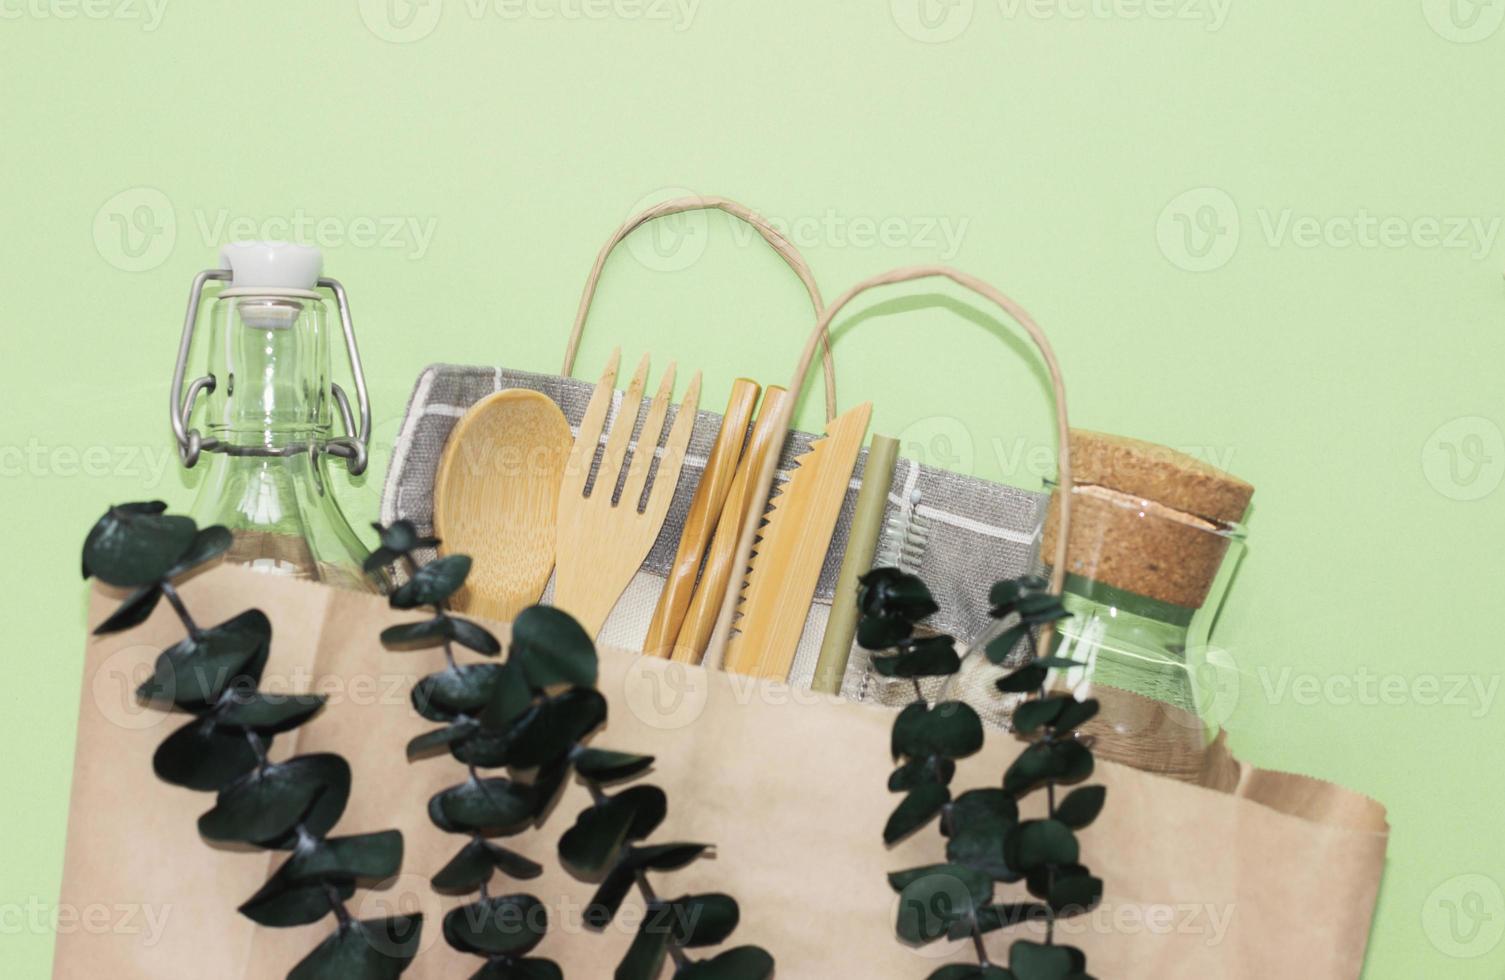 set of bamboo cutlery and glass bolltes in craft paper bag. eco friendly kitchen supply and zero waste concept. photo